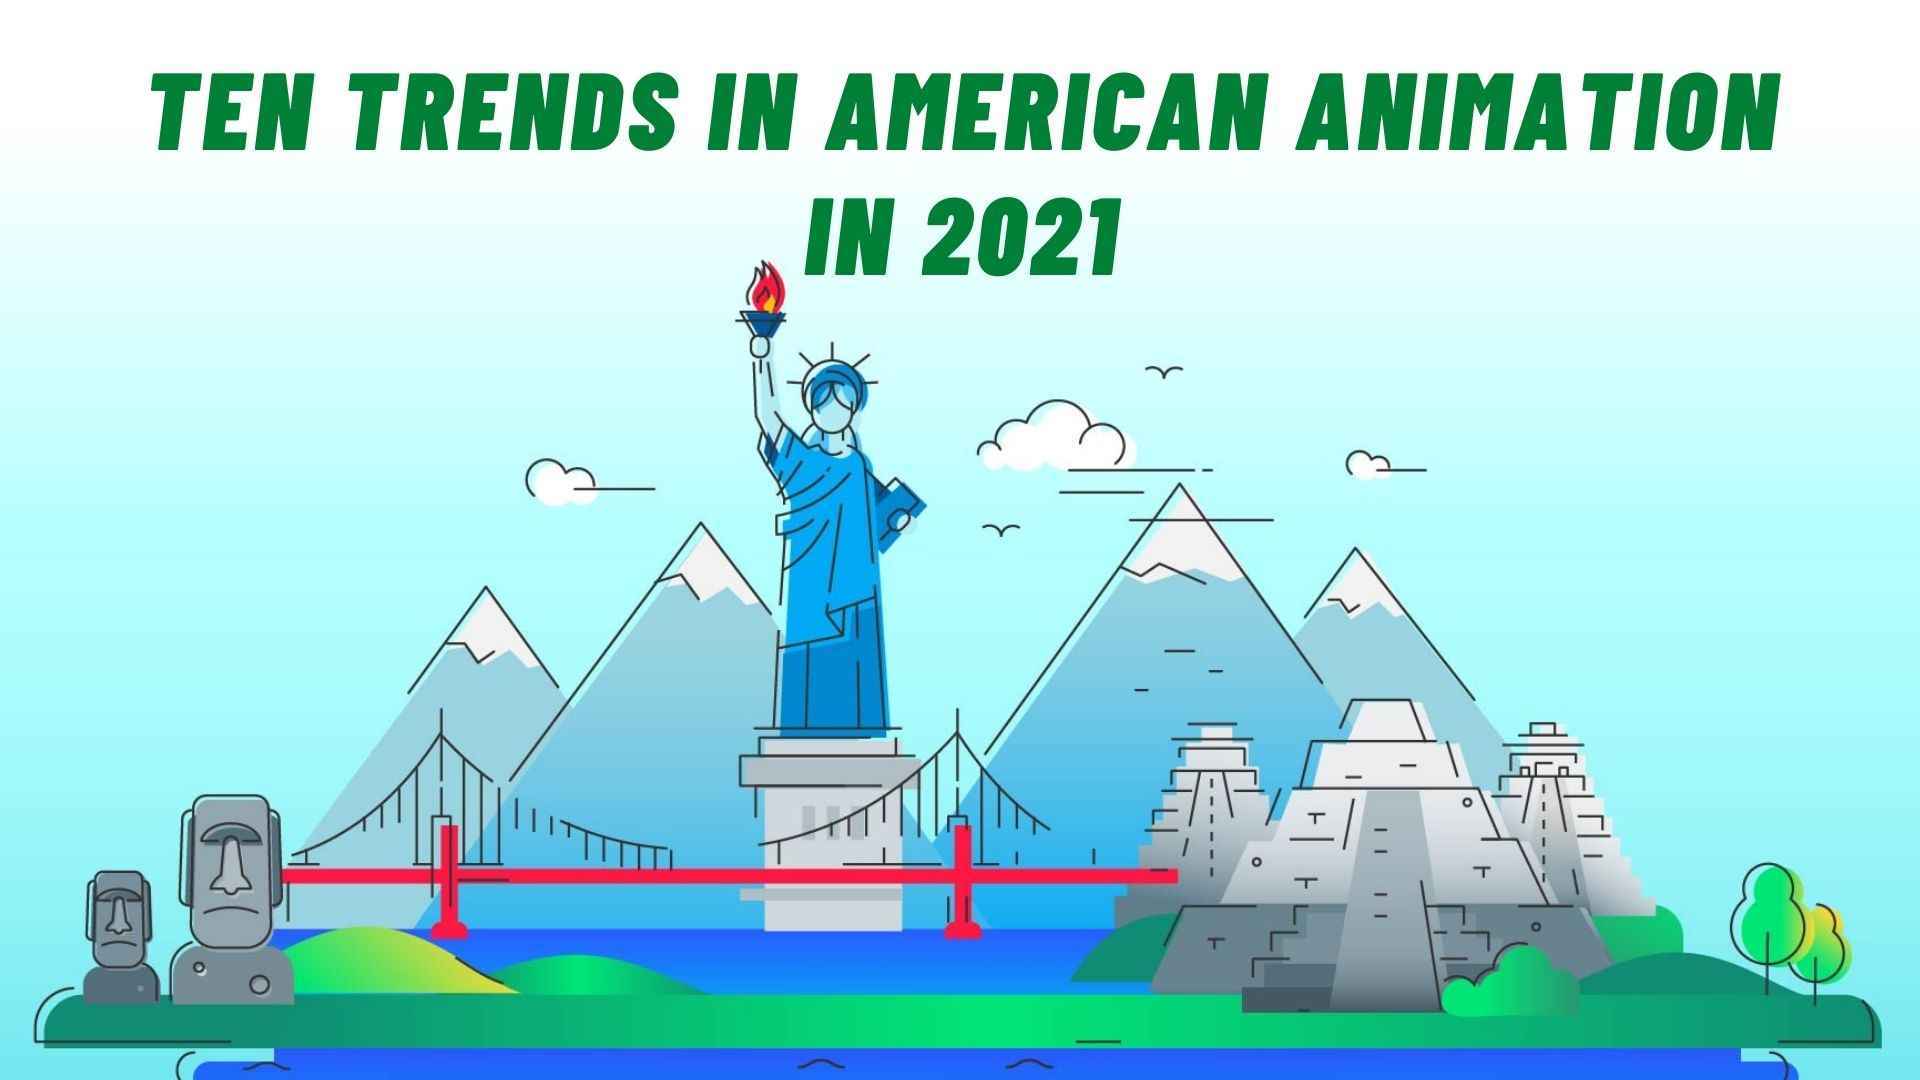 Trends in American Animation in 2021